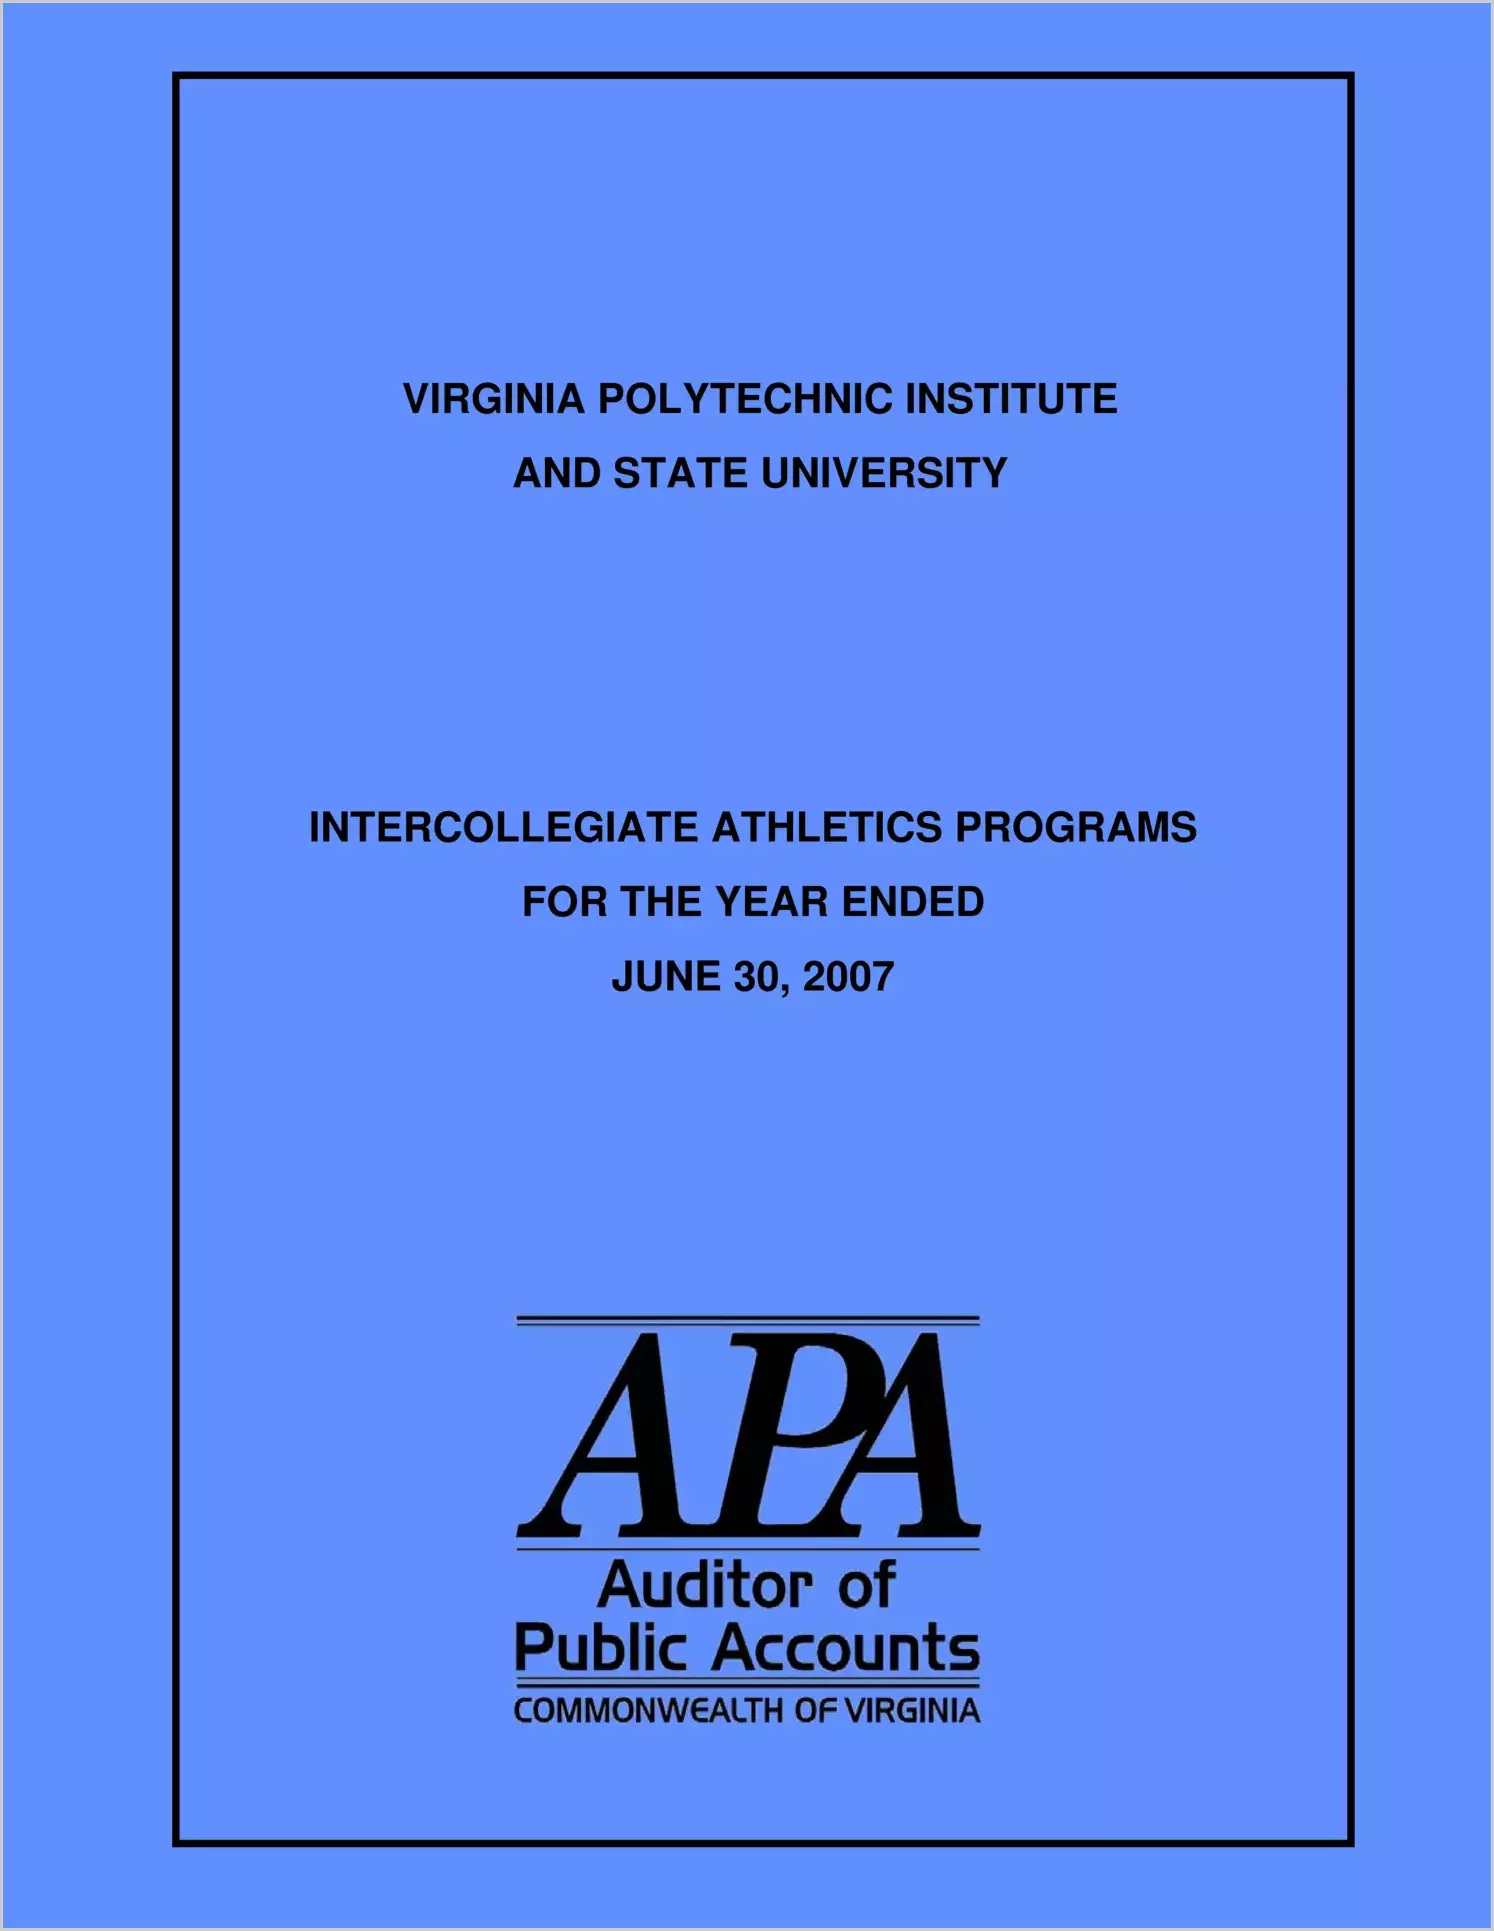 Virginia Polytechnic Institute and State University Intercollegiate Athletic Programs for the year ended June 30, 2007